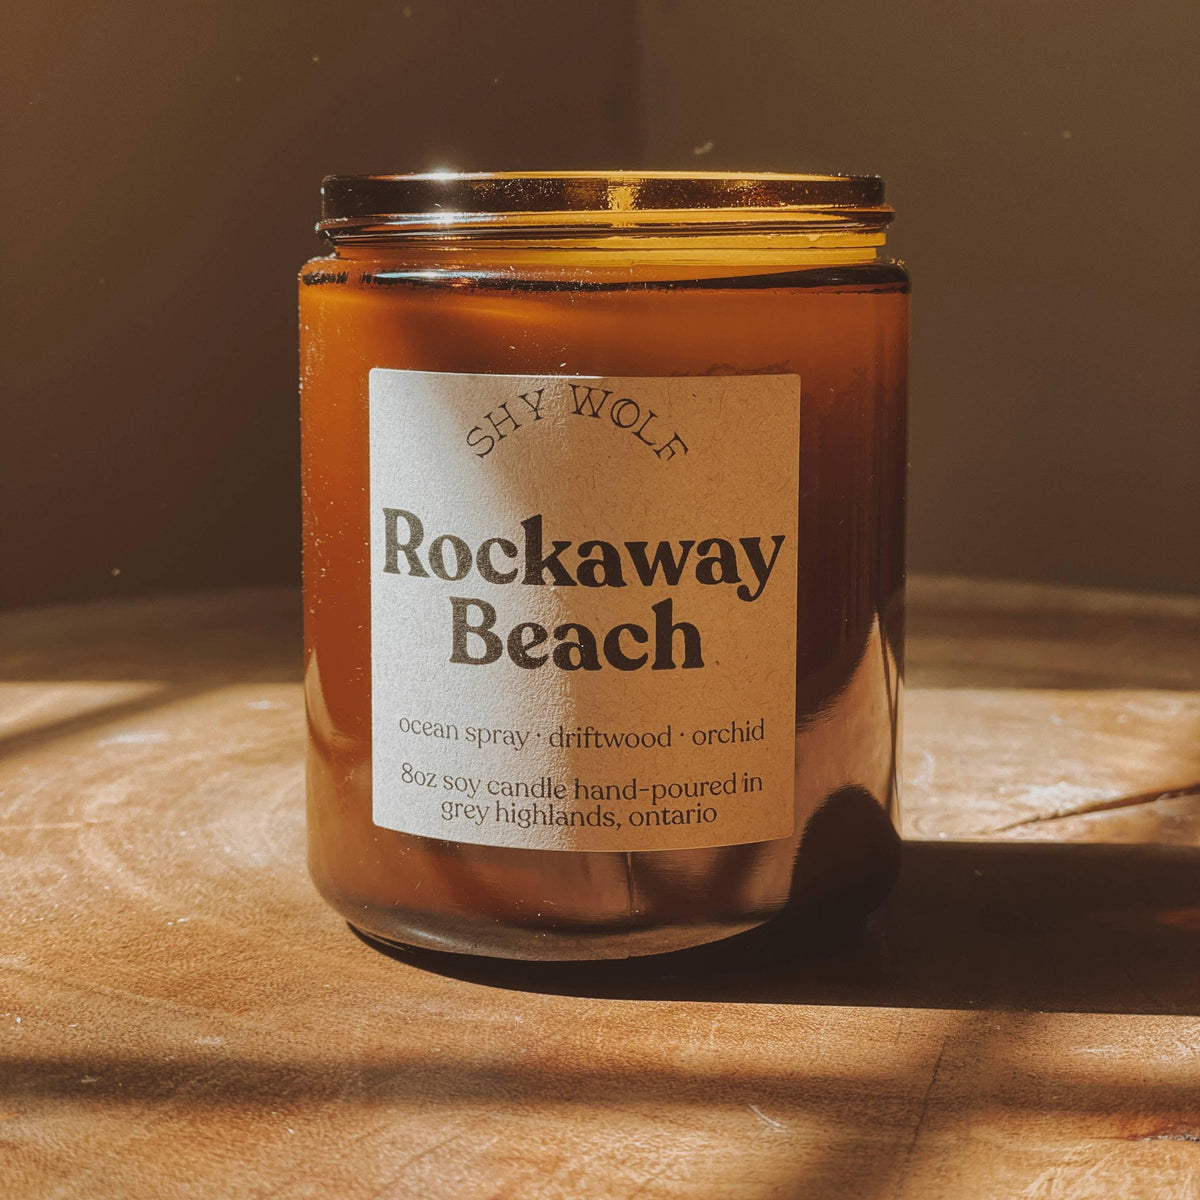 Shy Wolf Candles&#39; Rockaway Beach Candle - Ocean Spray, Driftwood, Orchid Scent